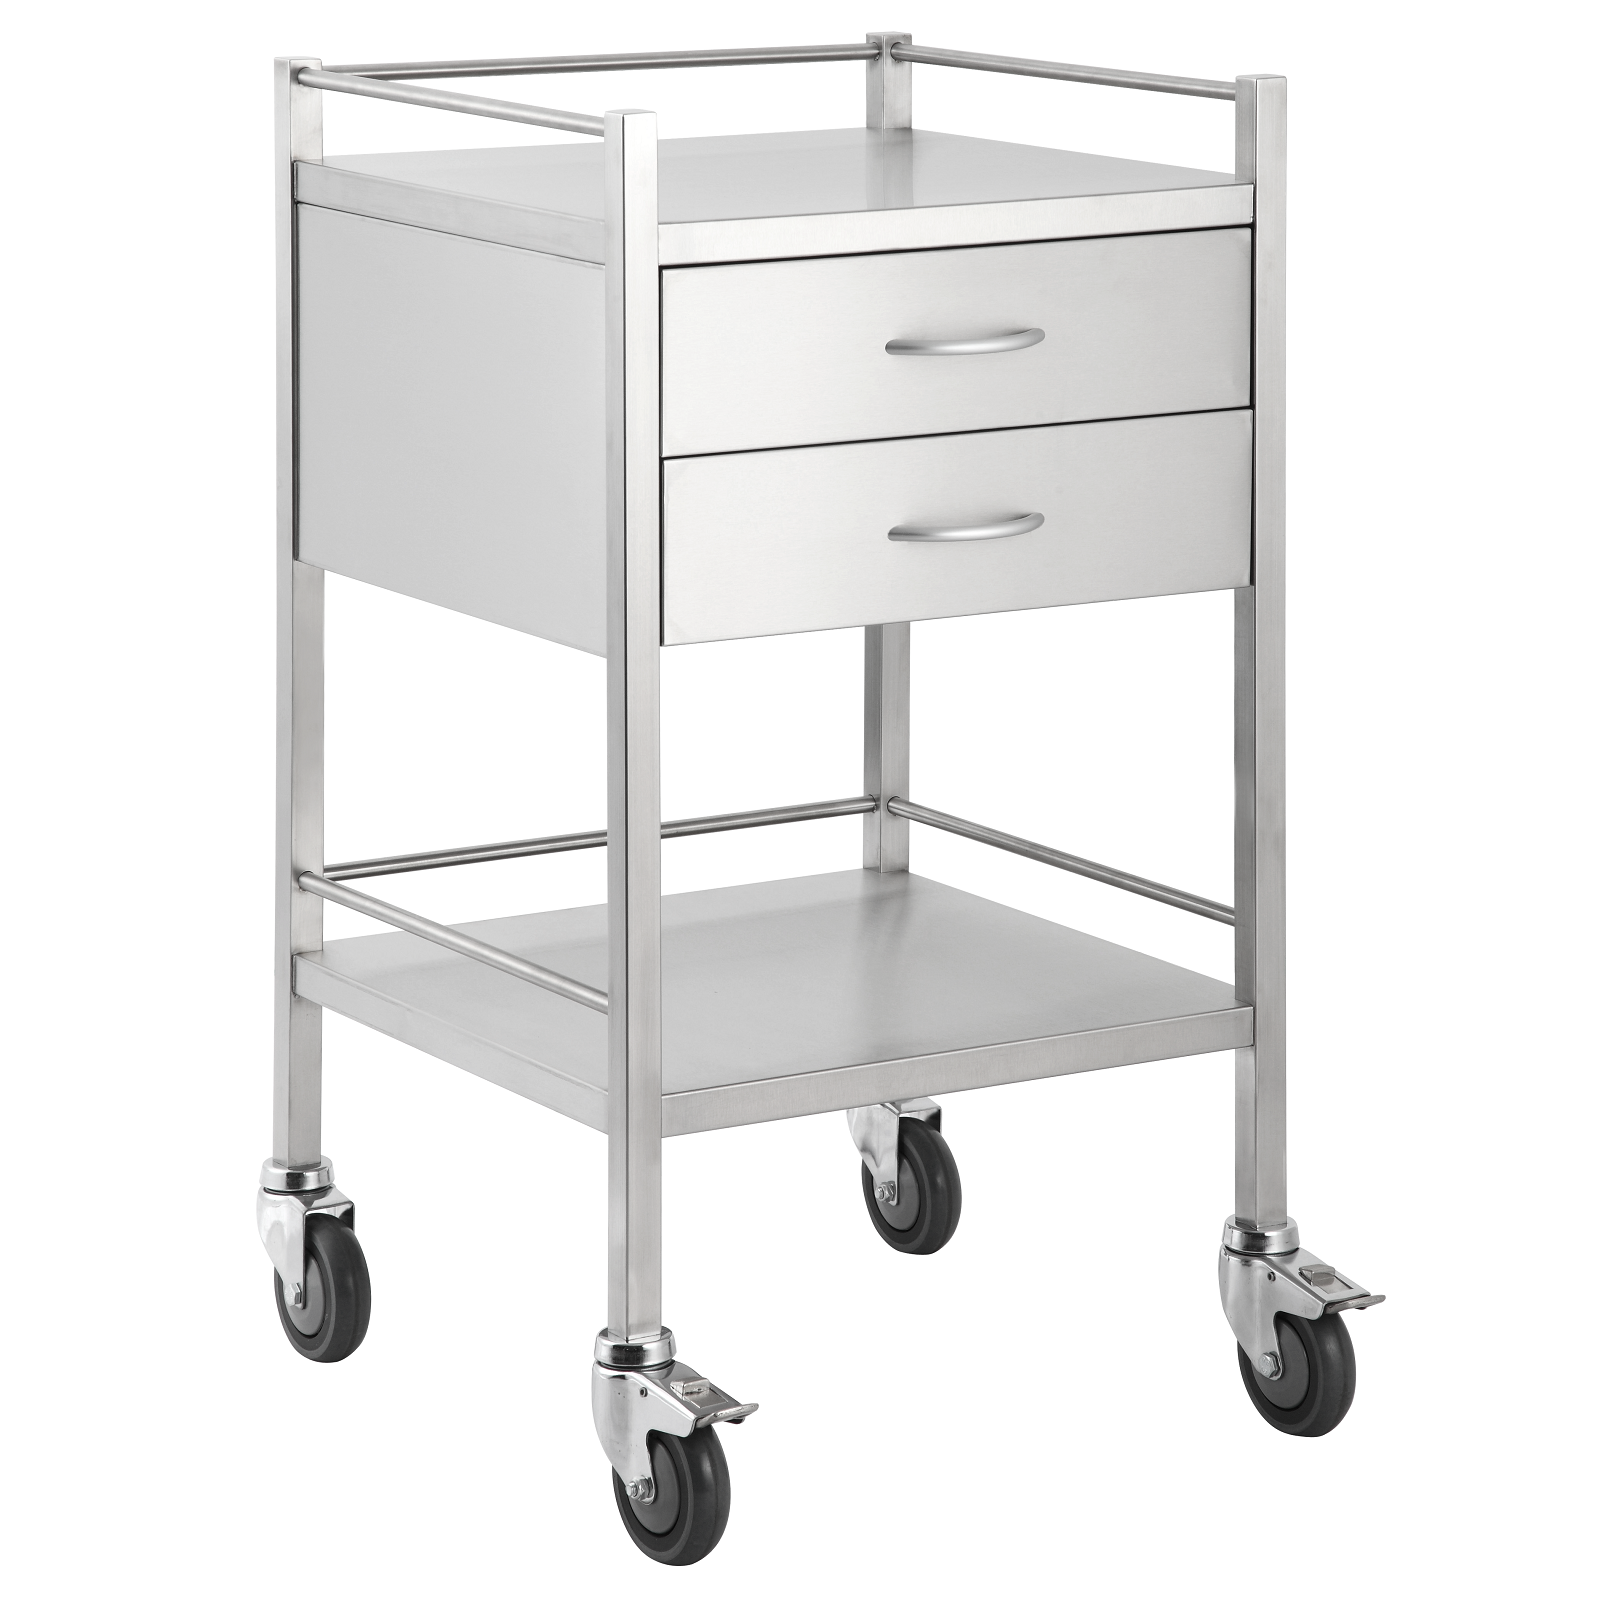 A high grade two drawer stainless steel trolley with smooth rolling castors, shelf, rails and an outstanding finish.